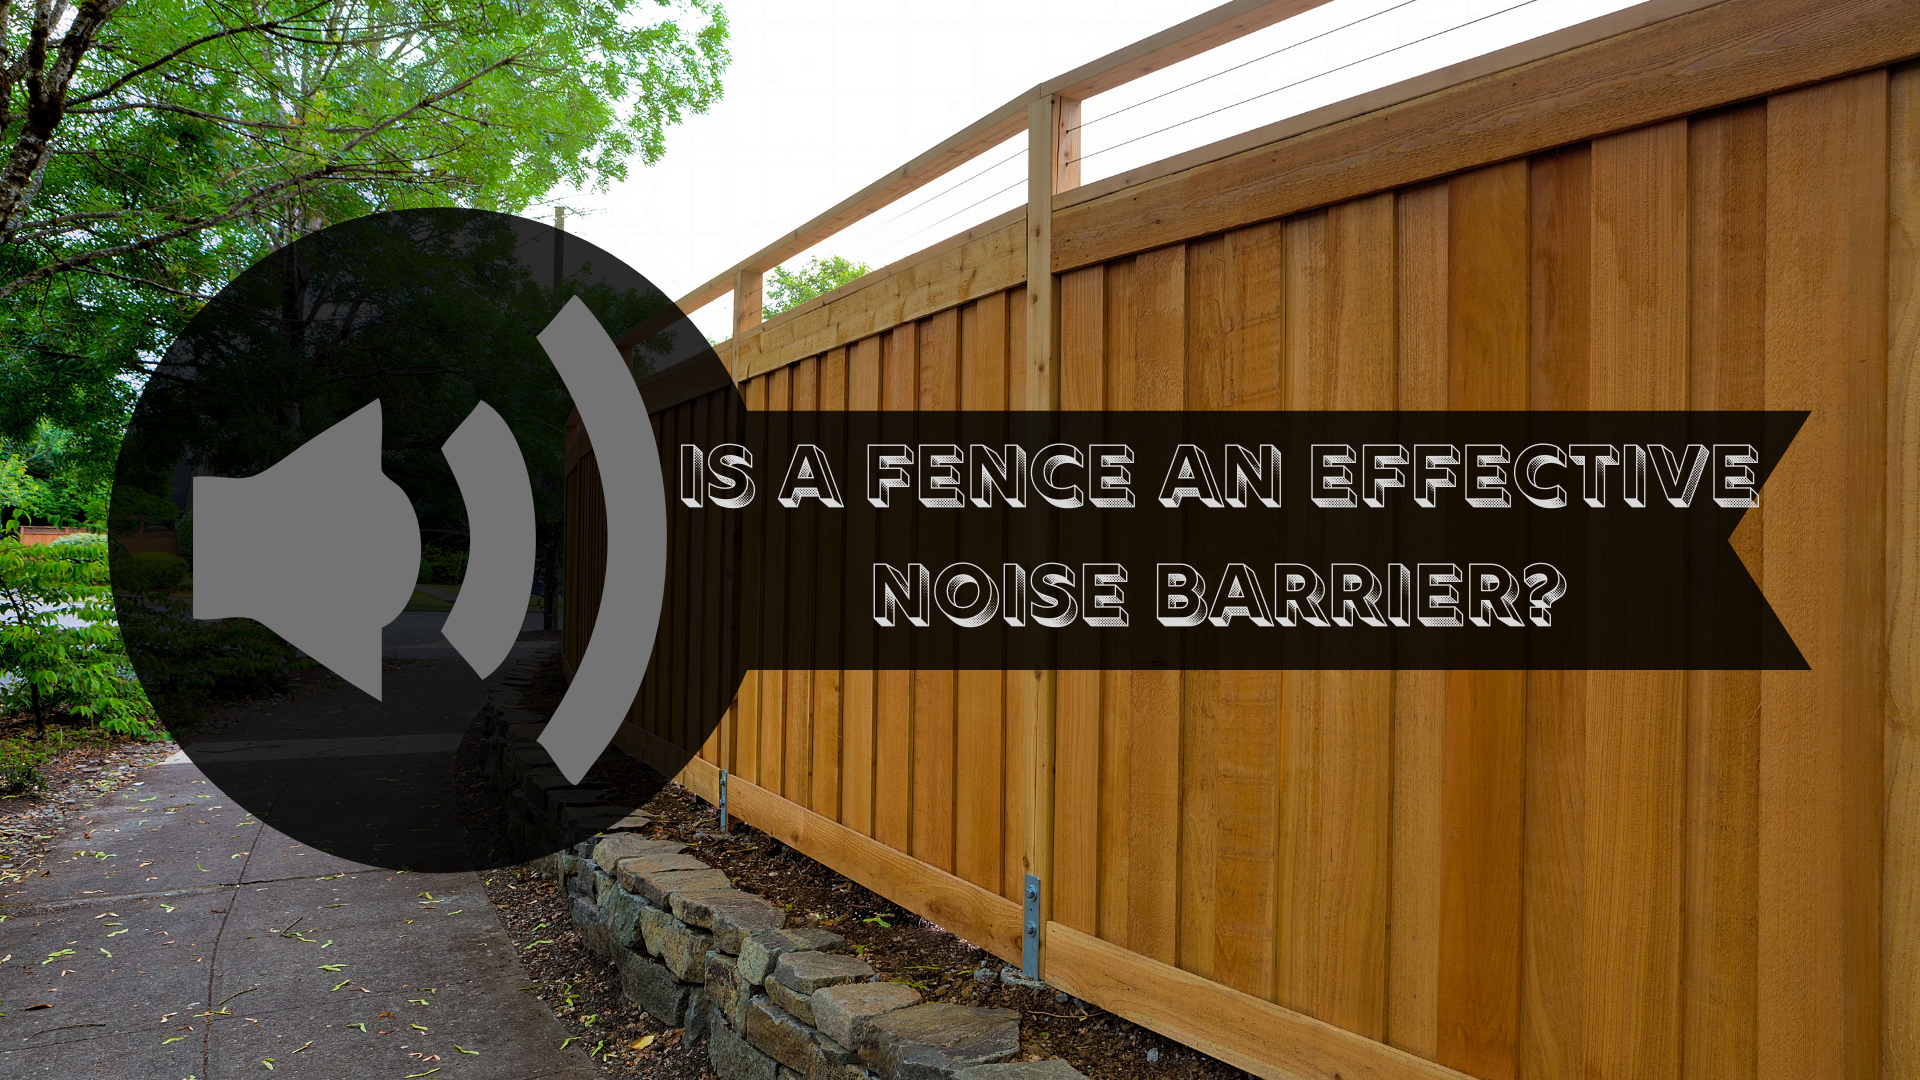 fence|noise|barrier|block|sounds|road|wood|privacy|highway|brick|quieter|wooden|tall|illinois|contractor|builder